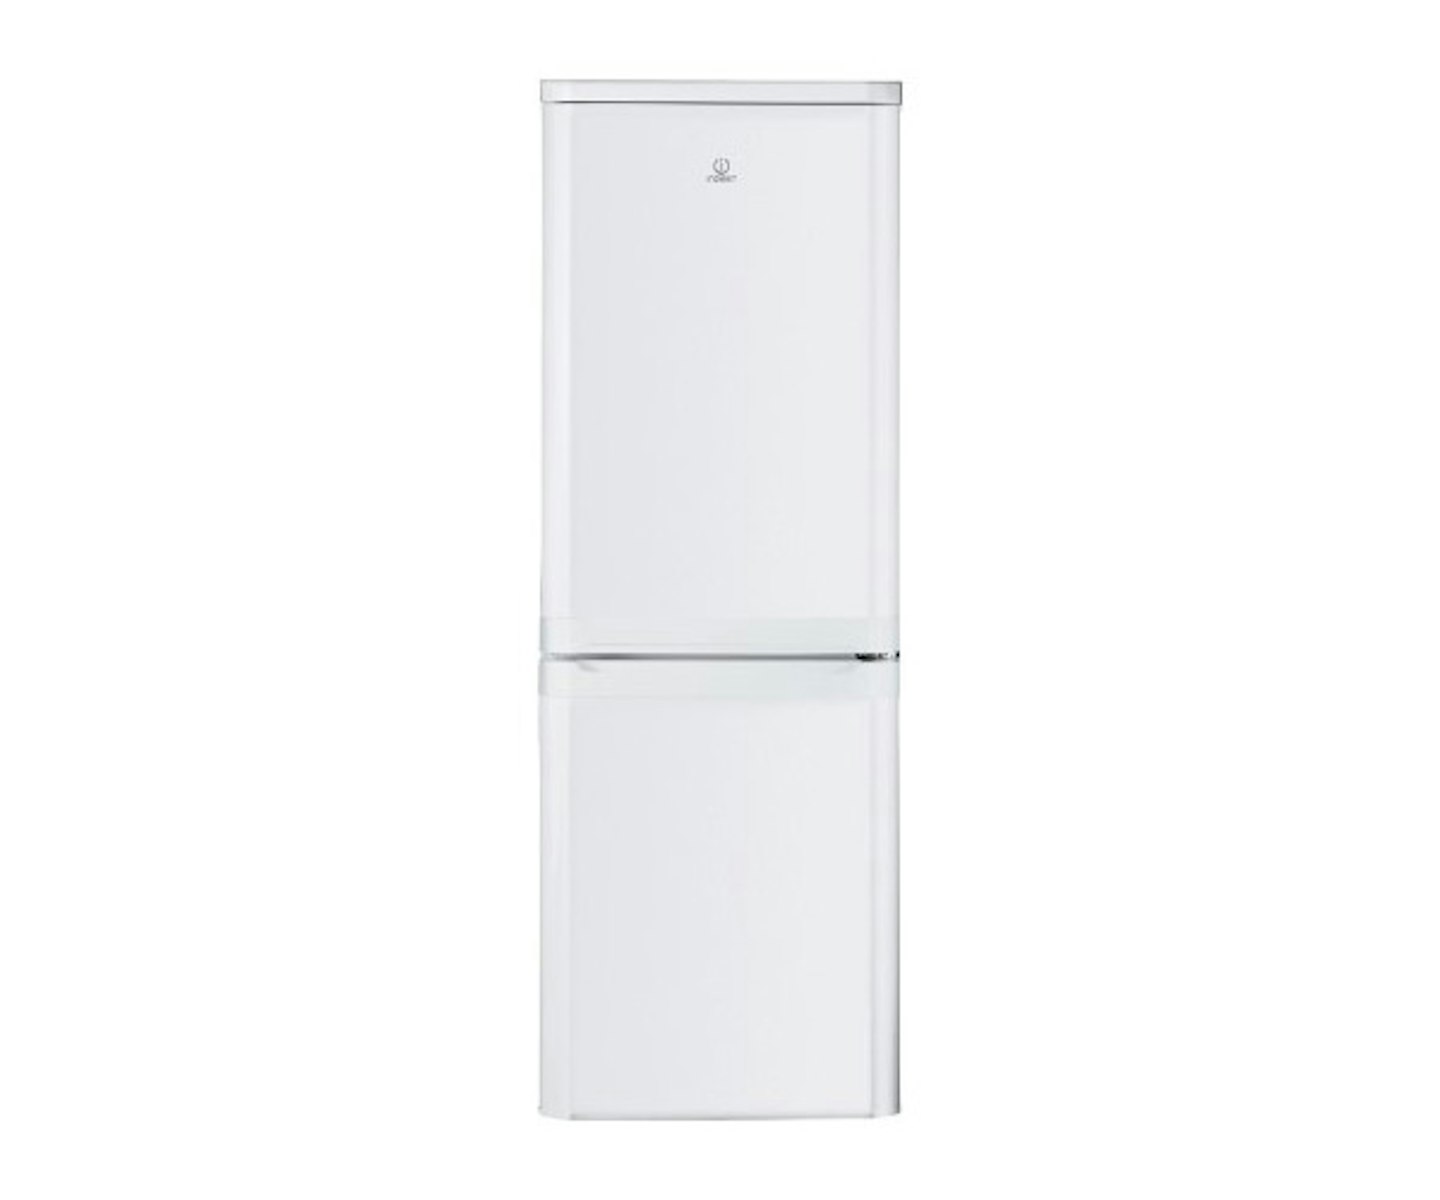 Indesit 208 Litre Freestanding Fridge Freezer With Silent Cooling - White